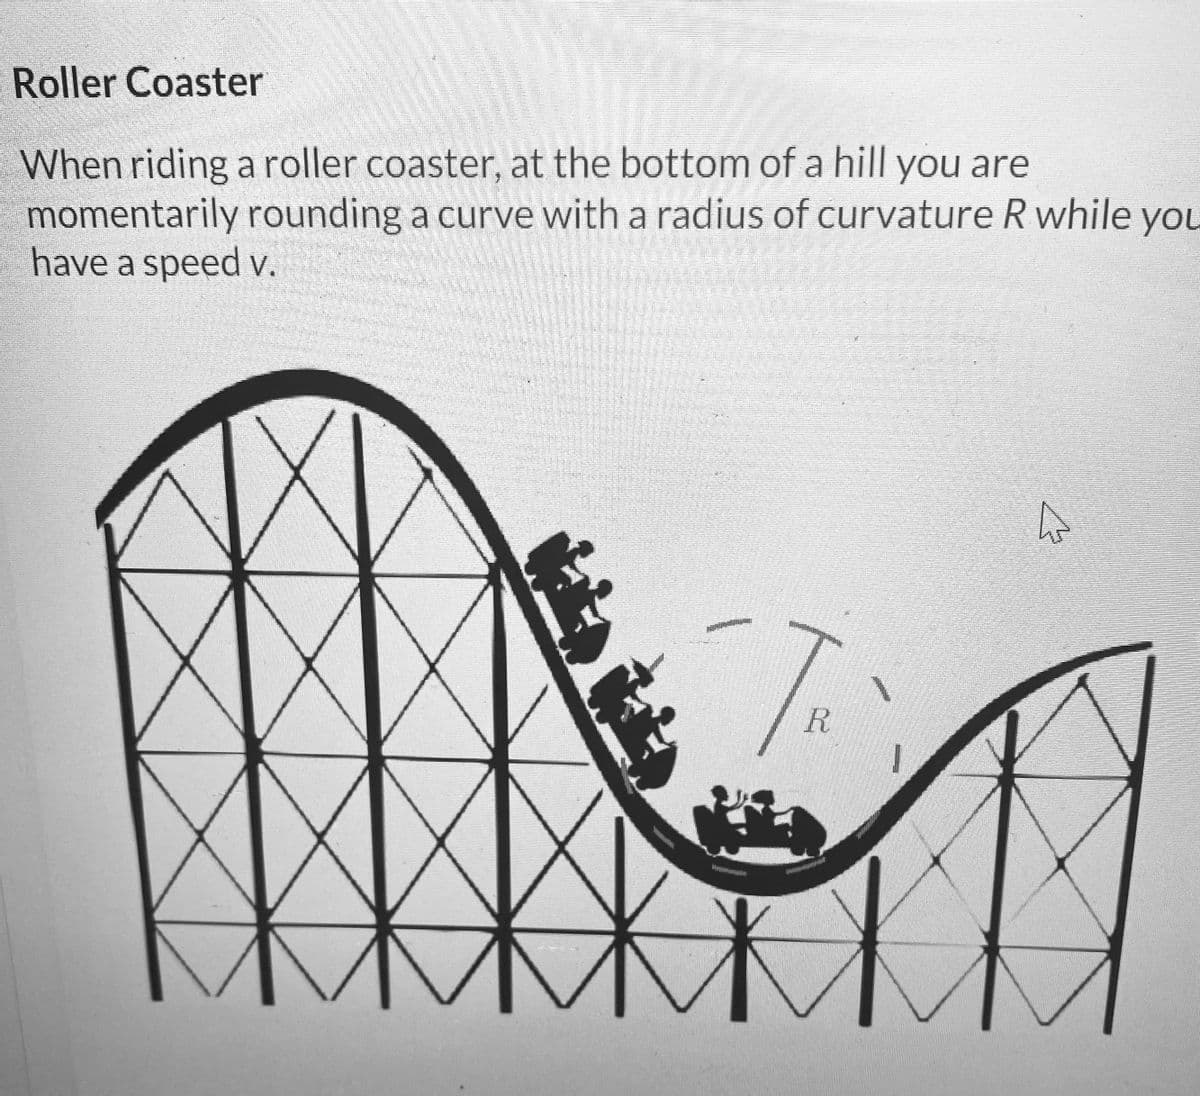 Roller Coaster
When riding a roller coaster, at the bottom of a hill you are
momentarily rounding a curve with a radius of curvature R while you
have a speed v.
H
TR
A